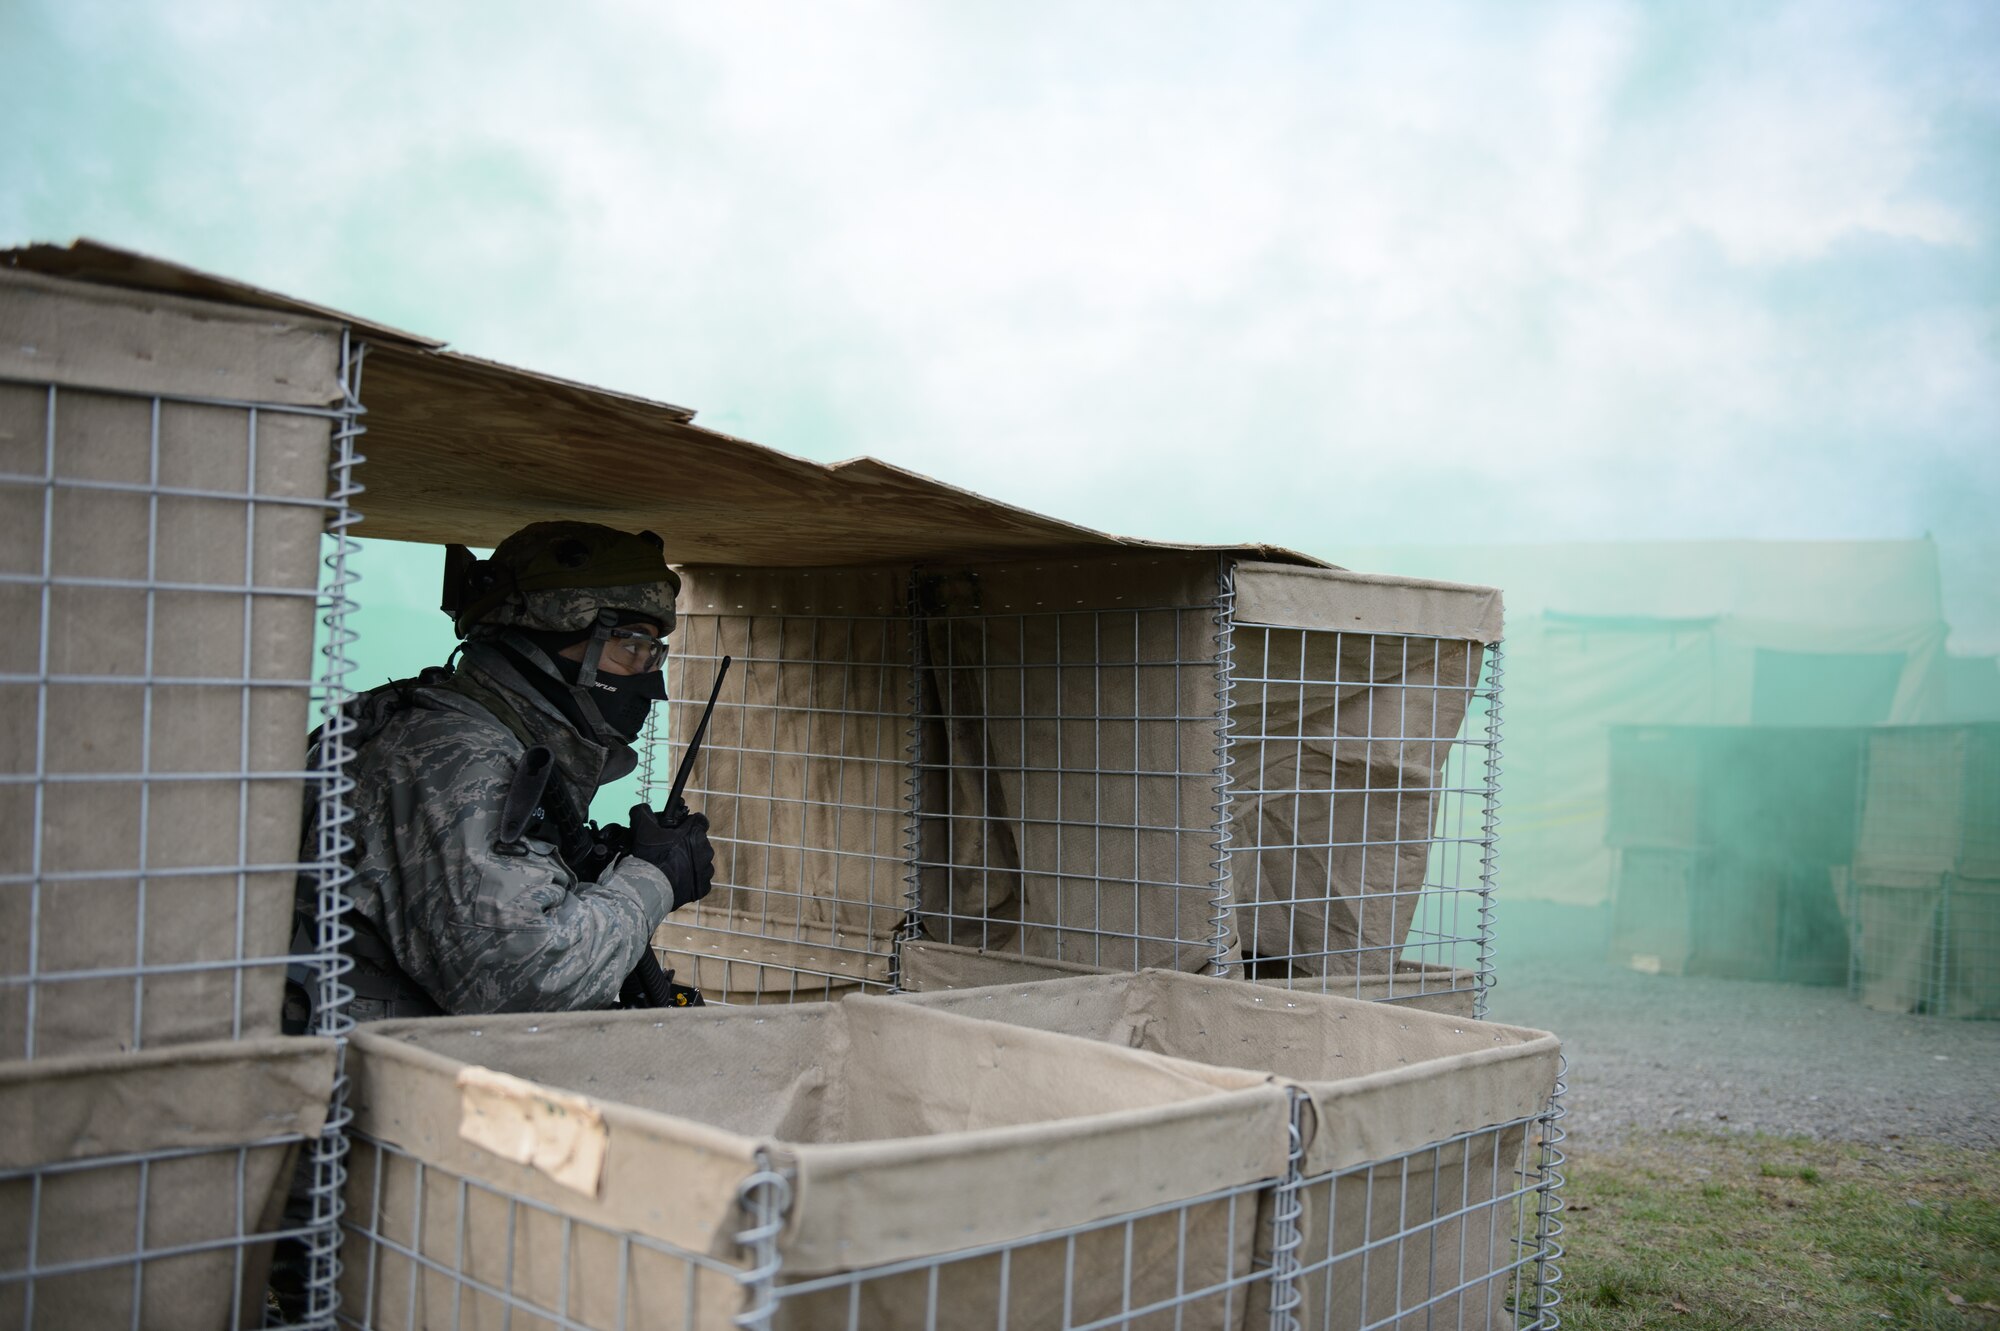 A 1st Combat Communications Squadron Airman makes a call on a radio as instructors release mock mortars on a compound Feb. 12, 2016, at Ramstein Air Base, Germany. The 1st CBCS conducts regular deployment skills training to prepare Airmen for any situation they may encounter. (U.S. Air Force photo/Staff Sgt. Armando A. Schwier-Morales)